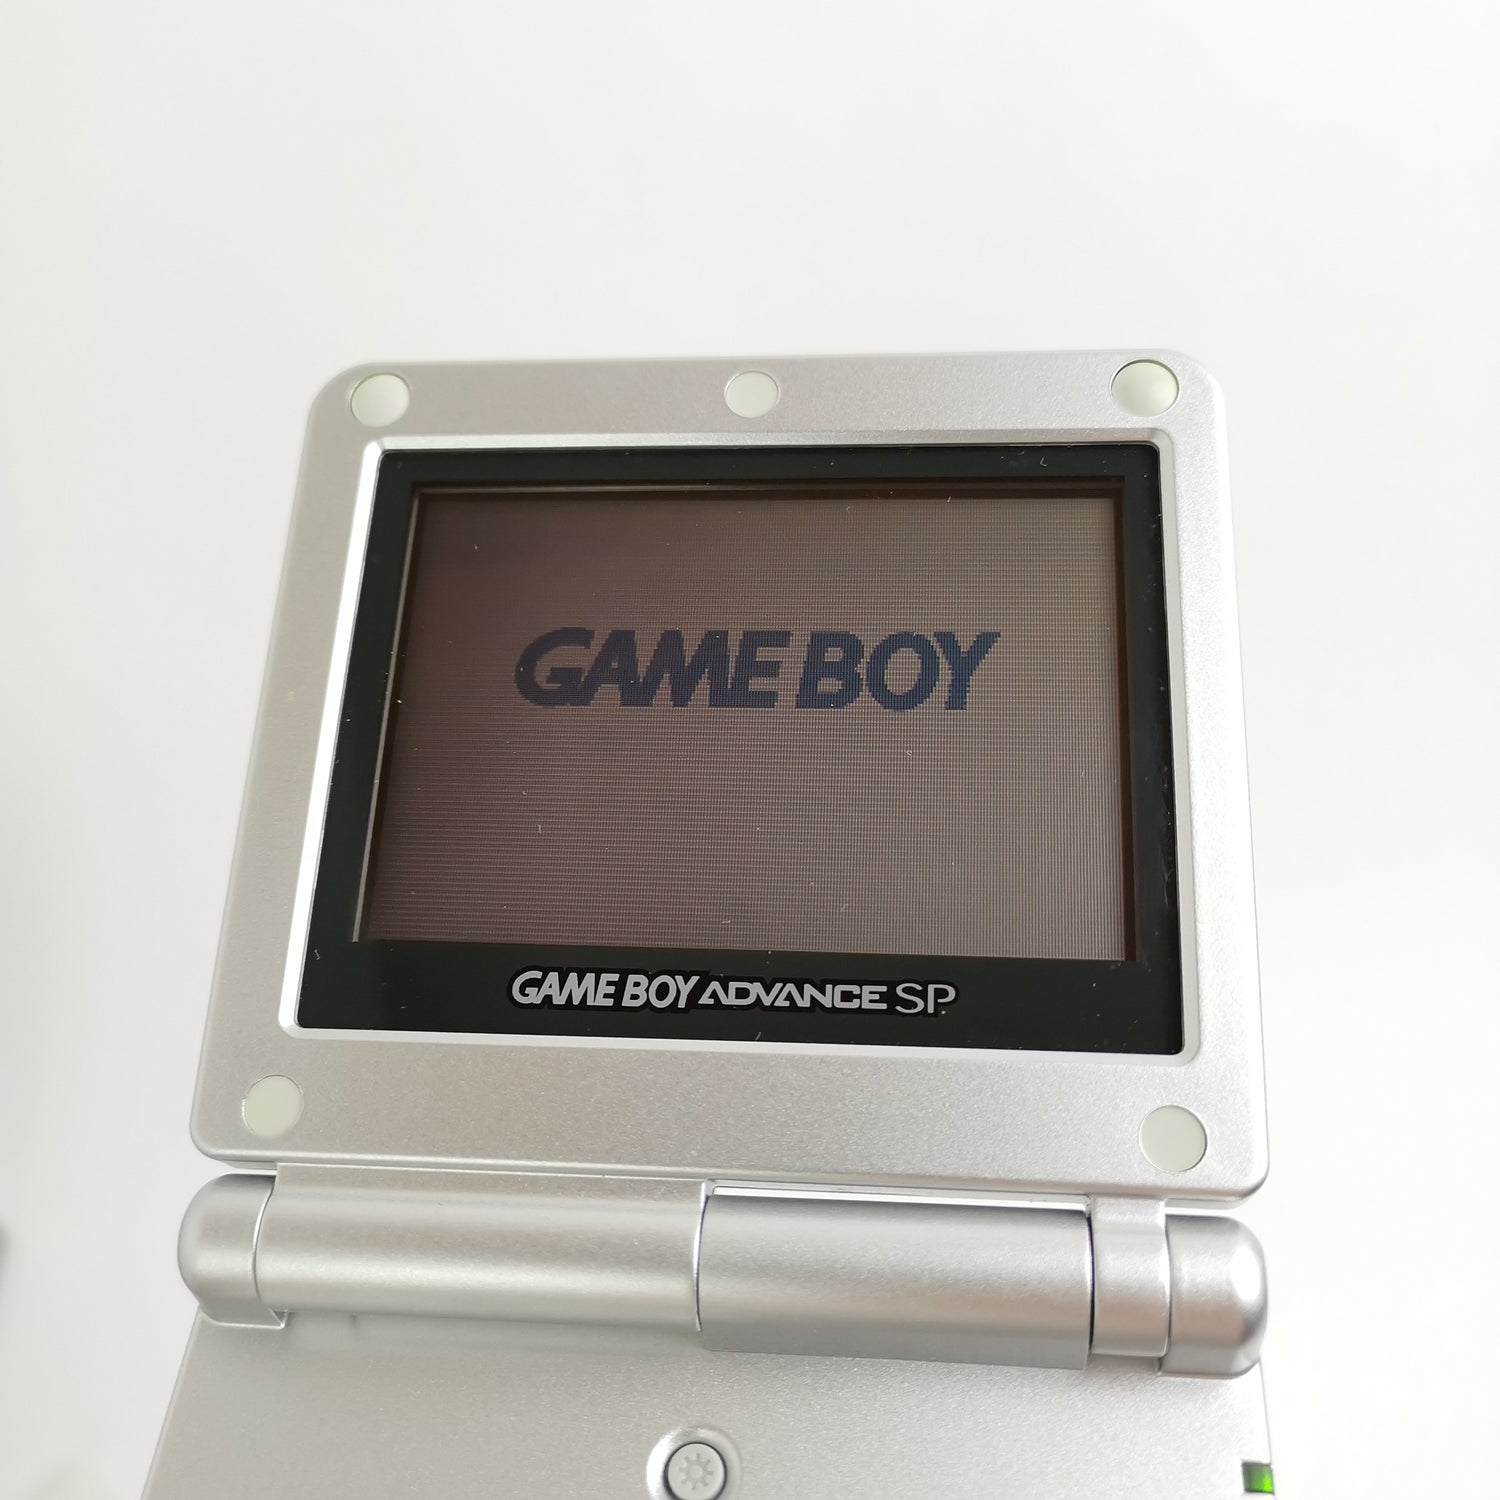 Nintendo Game Boy Advance SP Console / Console - Silver Silver in OVP PAL AGS001